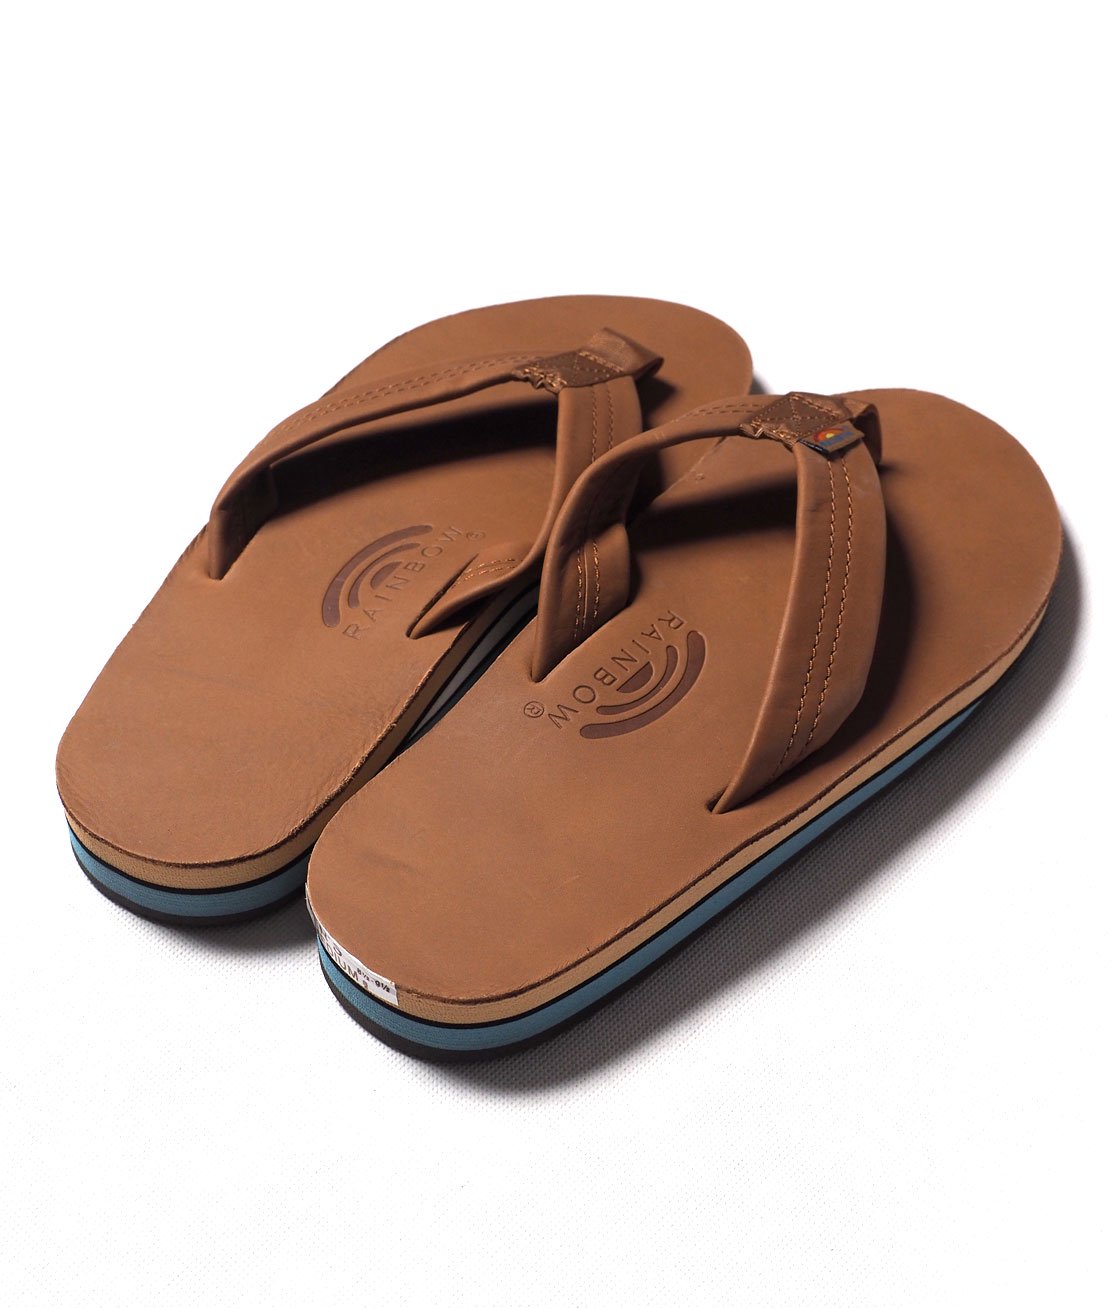 【RAINBOW SANDALS】DOUBLE LAYER CLASSIC LEATHER - TAN/BLUE サンダル - HUNKY DORY